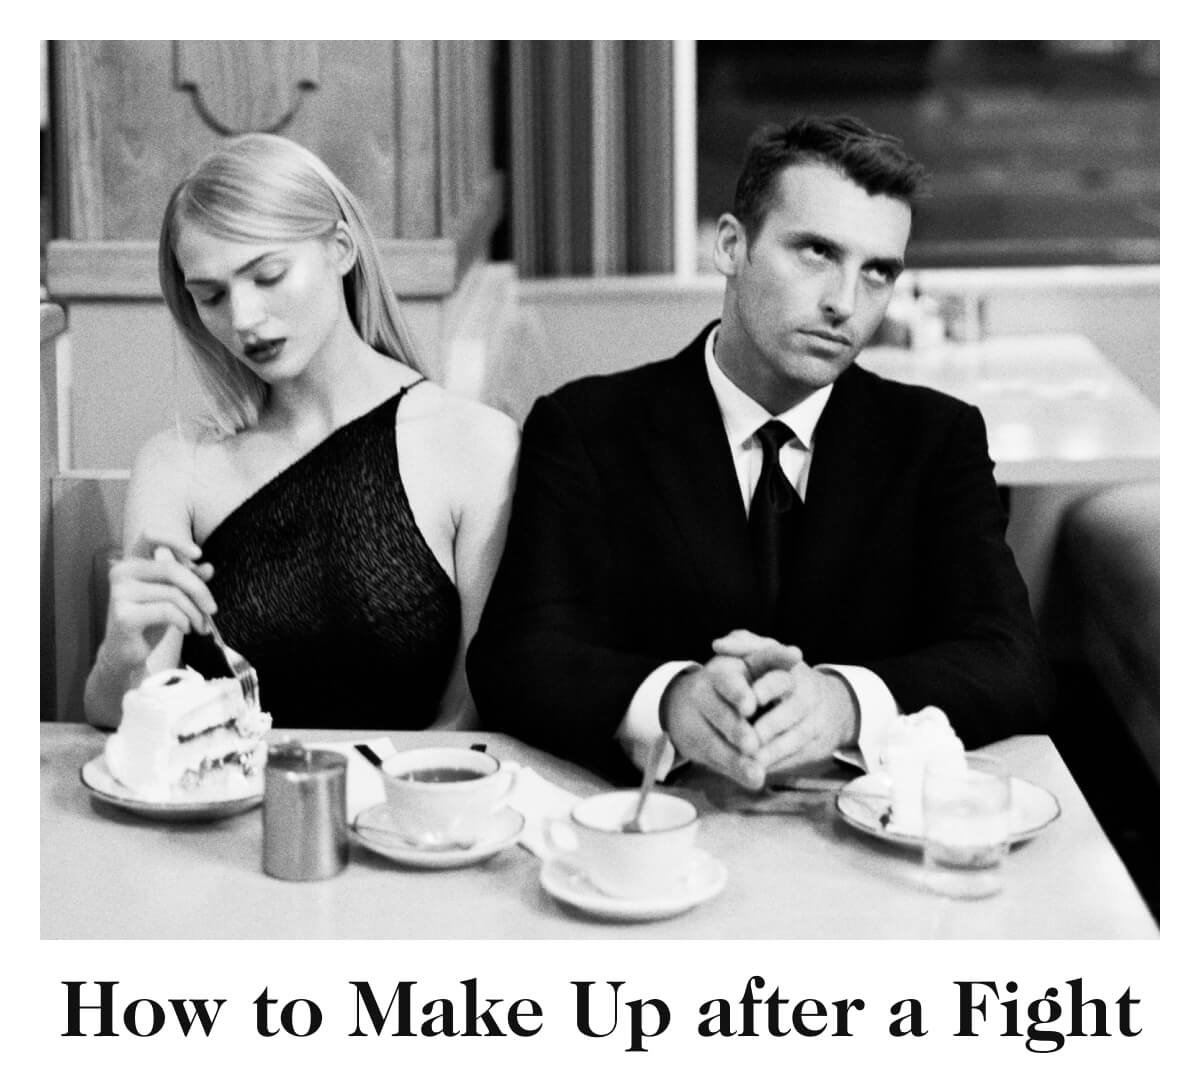 How to Make Up after a Fight